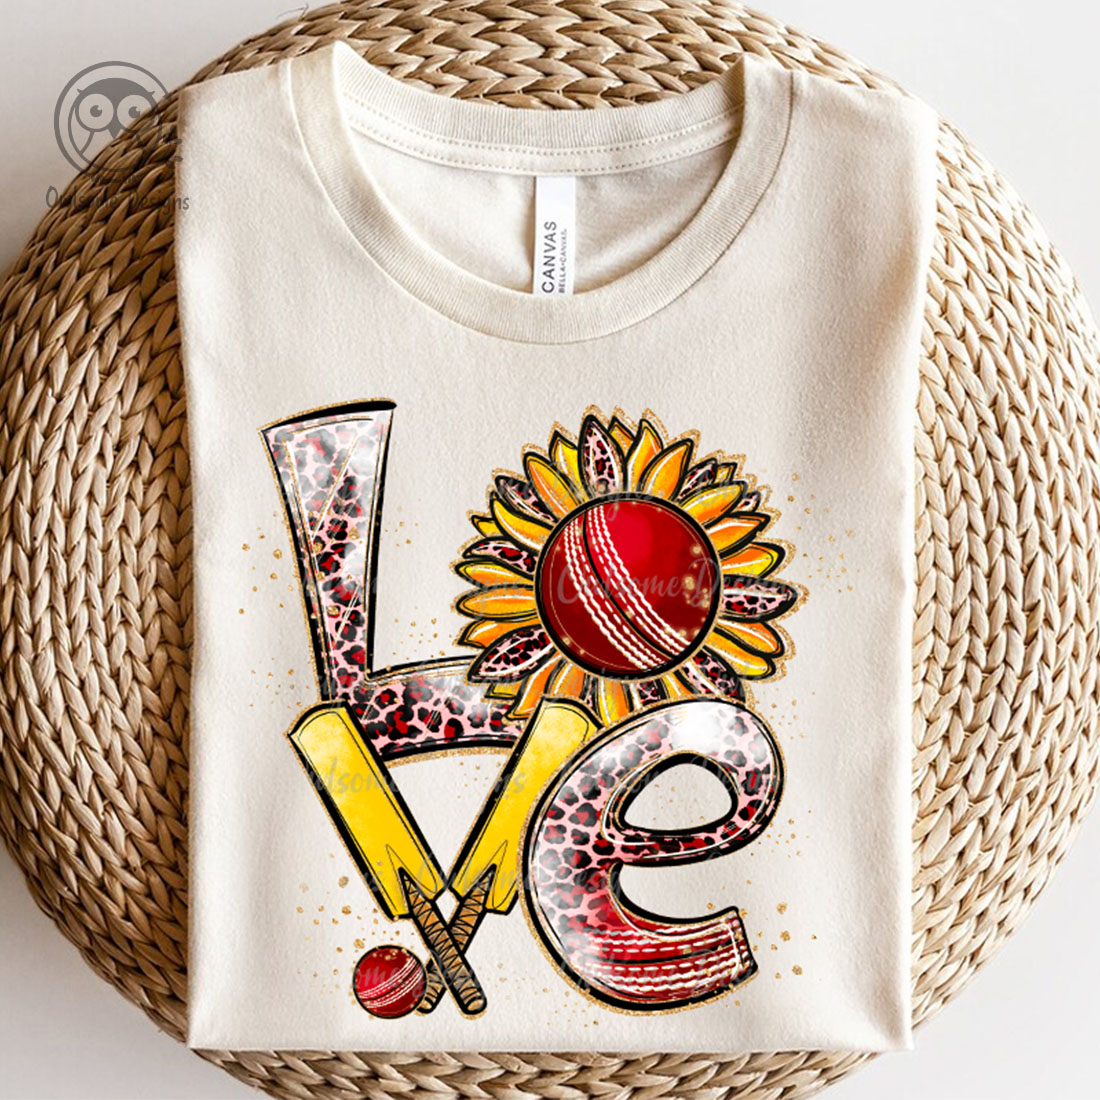 Image of a T-shirt with a unique inscription Love with elements of cricket.